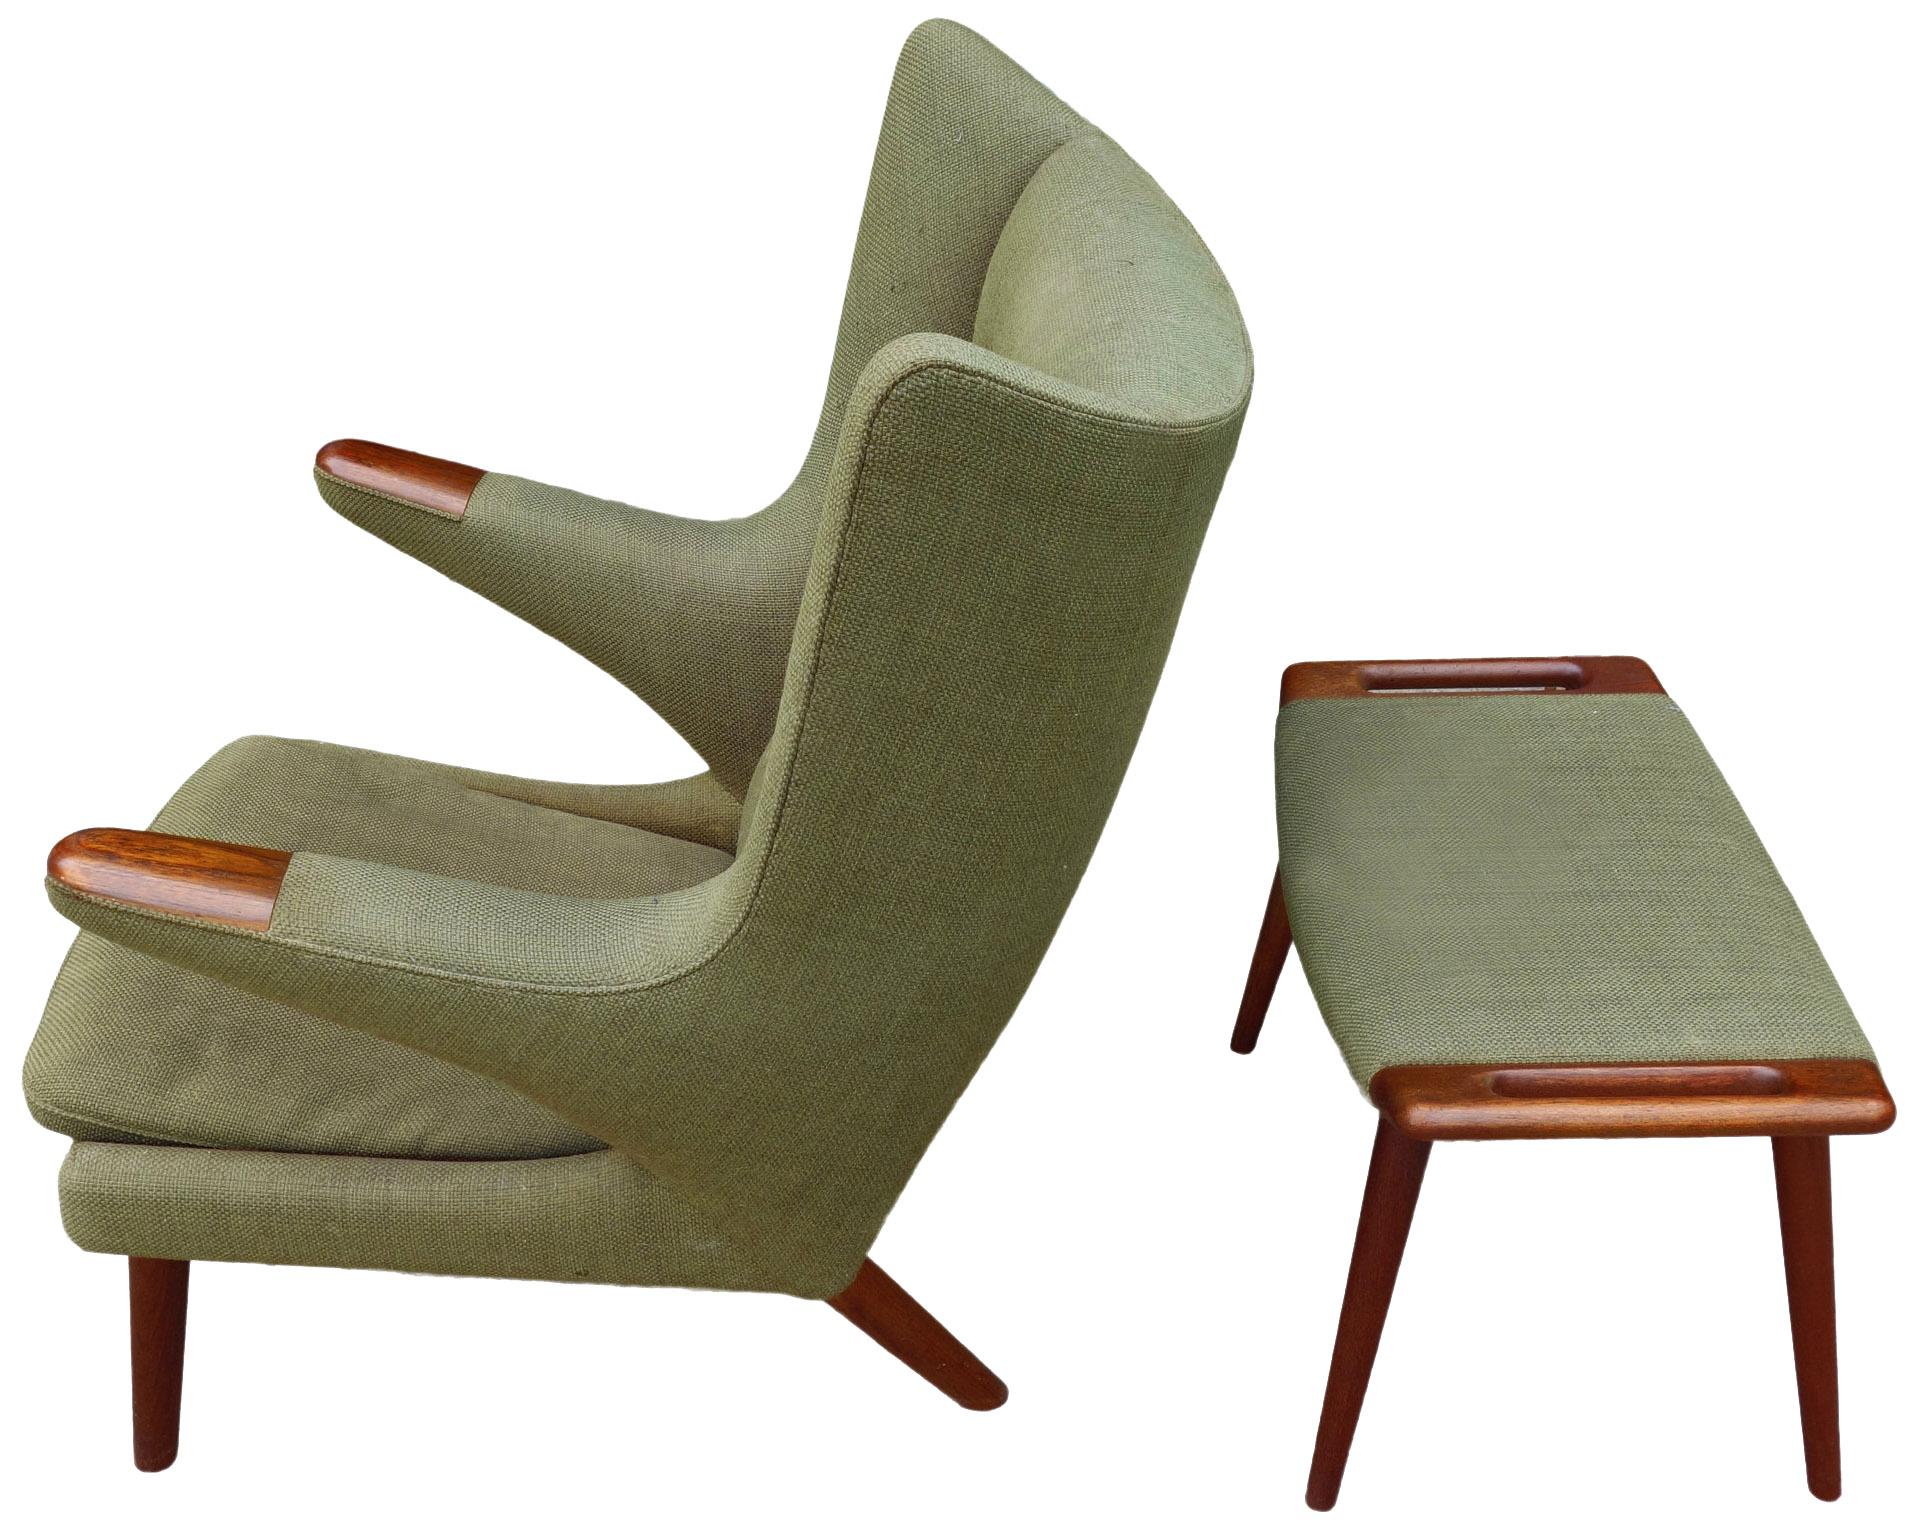 For your consideration is the most comfortable and recognizable lounge chair in Danish design. This Mid-Century icon is in original condition featuring teak accents with amazing patina. The chair and ottoman are incredibly strong and sturdy with the